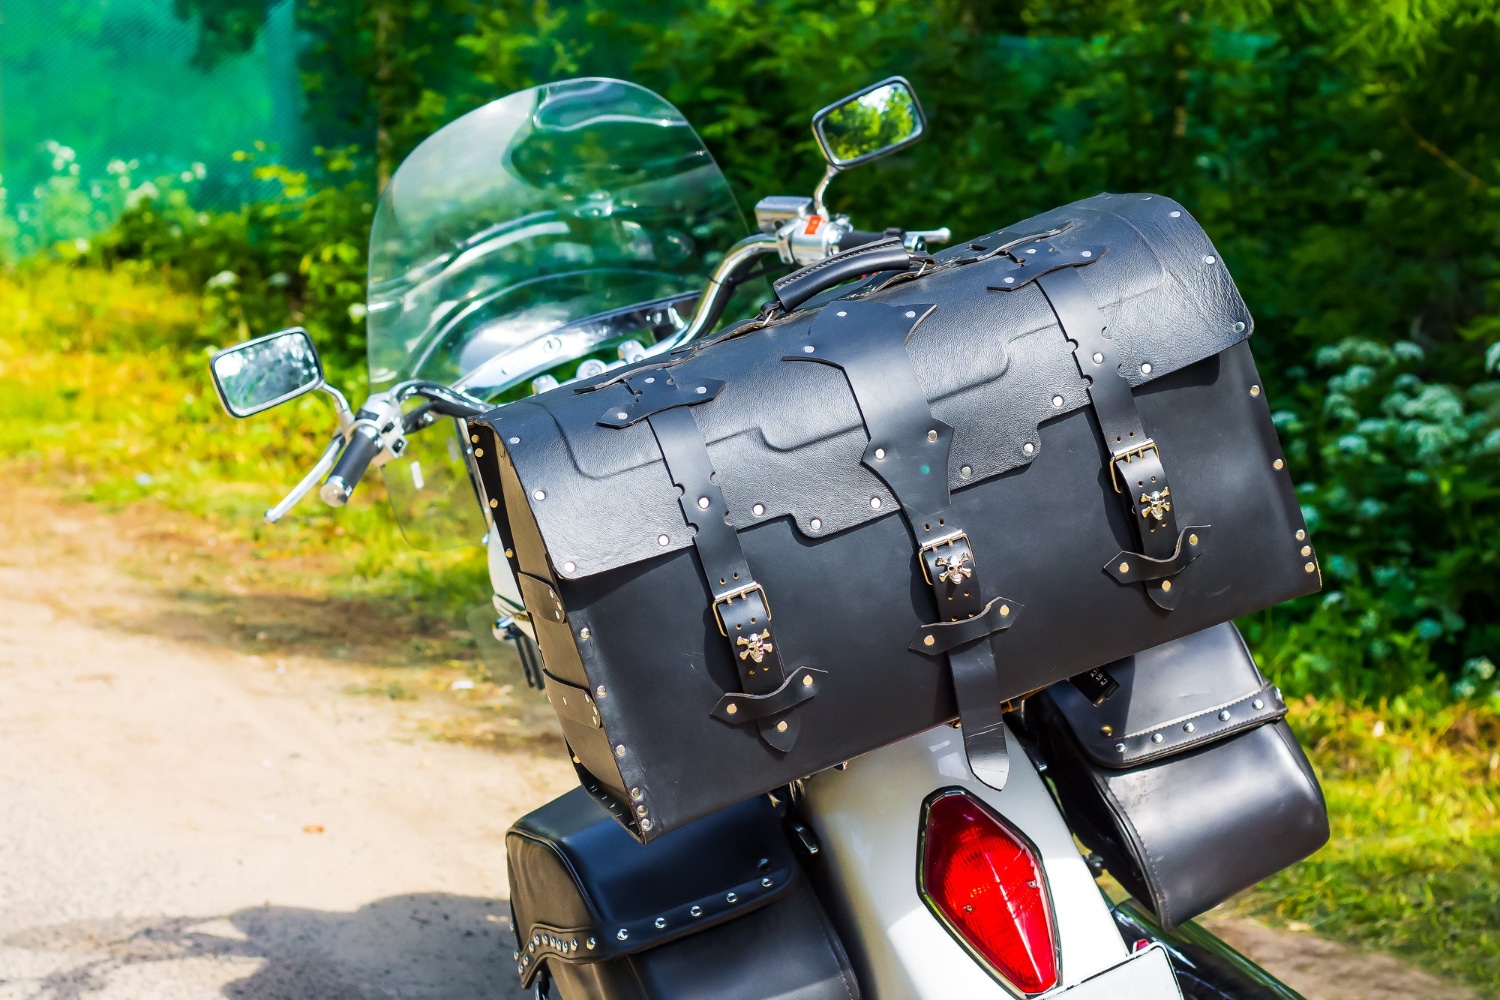 Travel In Style With Viking Bags’s Durable Motorcycle Luggage